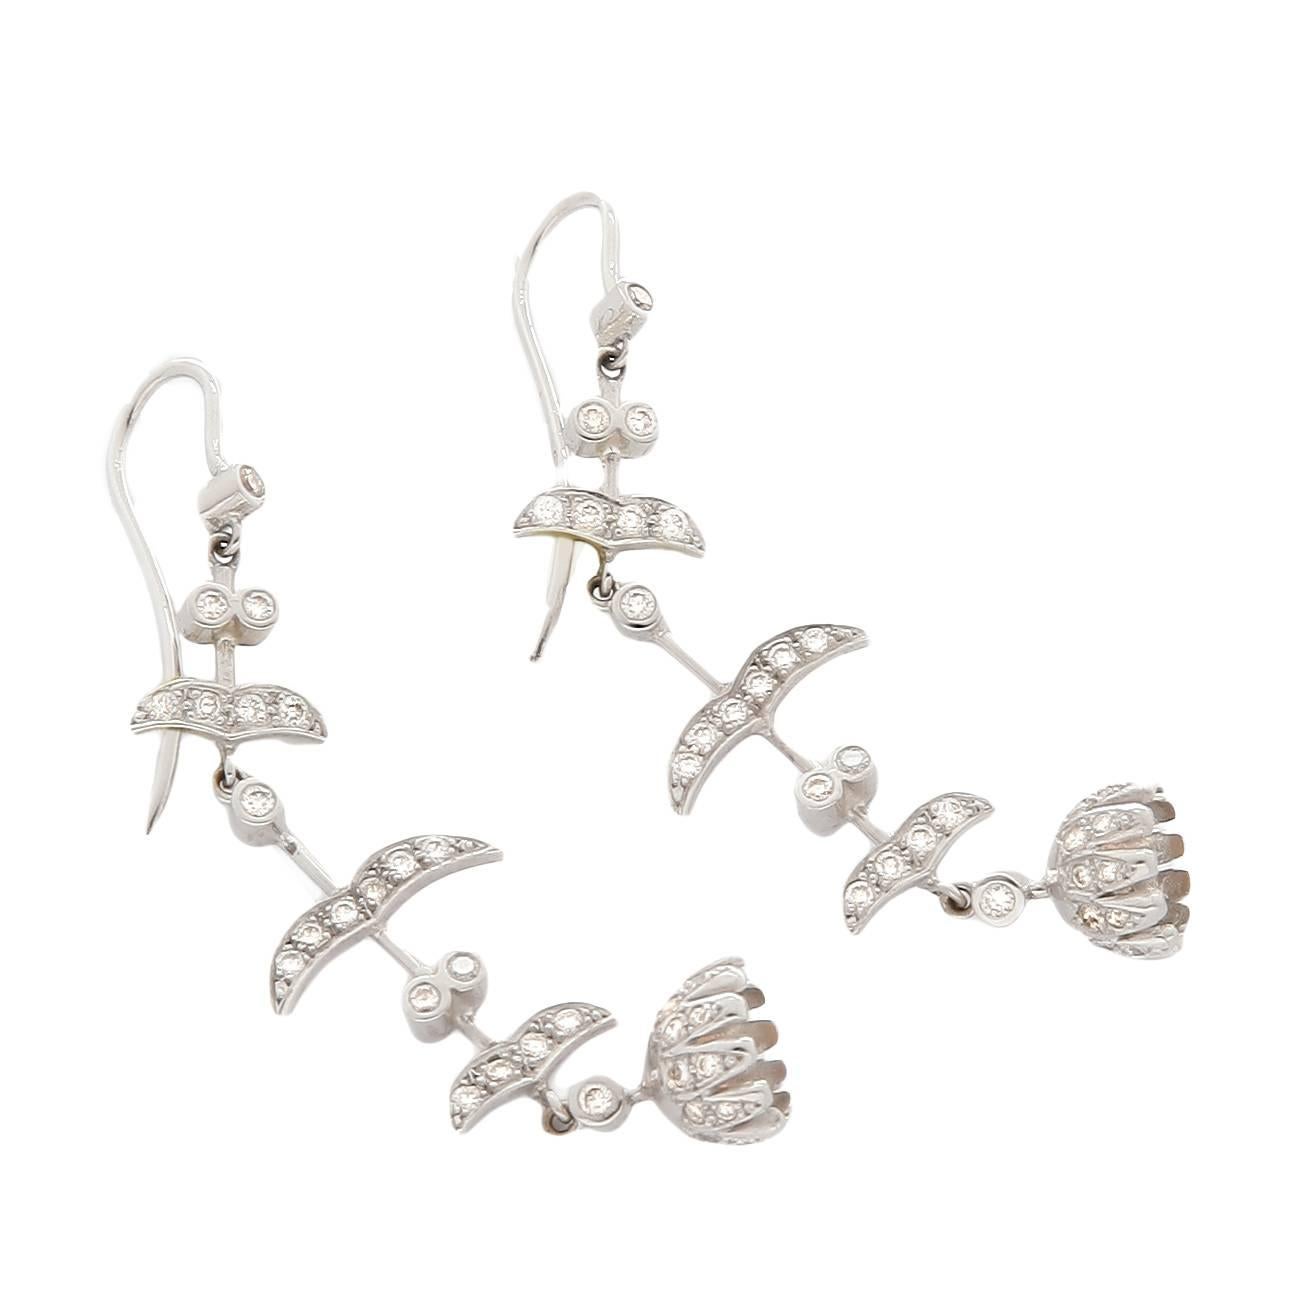 Contemporary Garnazelle Earings "Olympia Clochette" For Sale